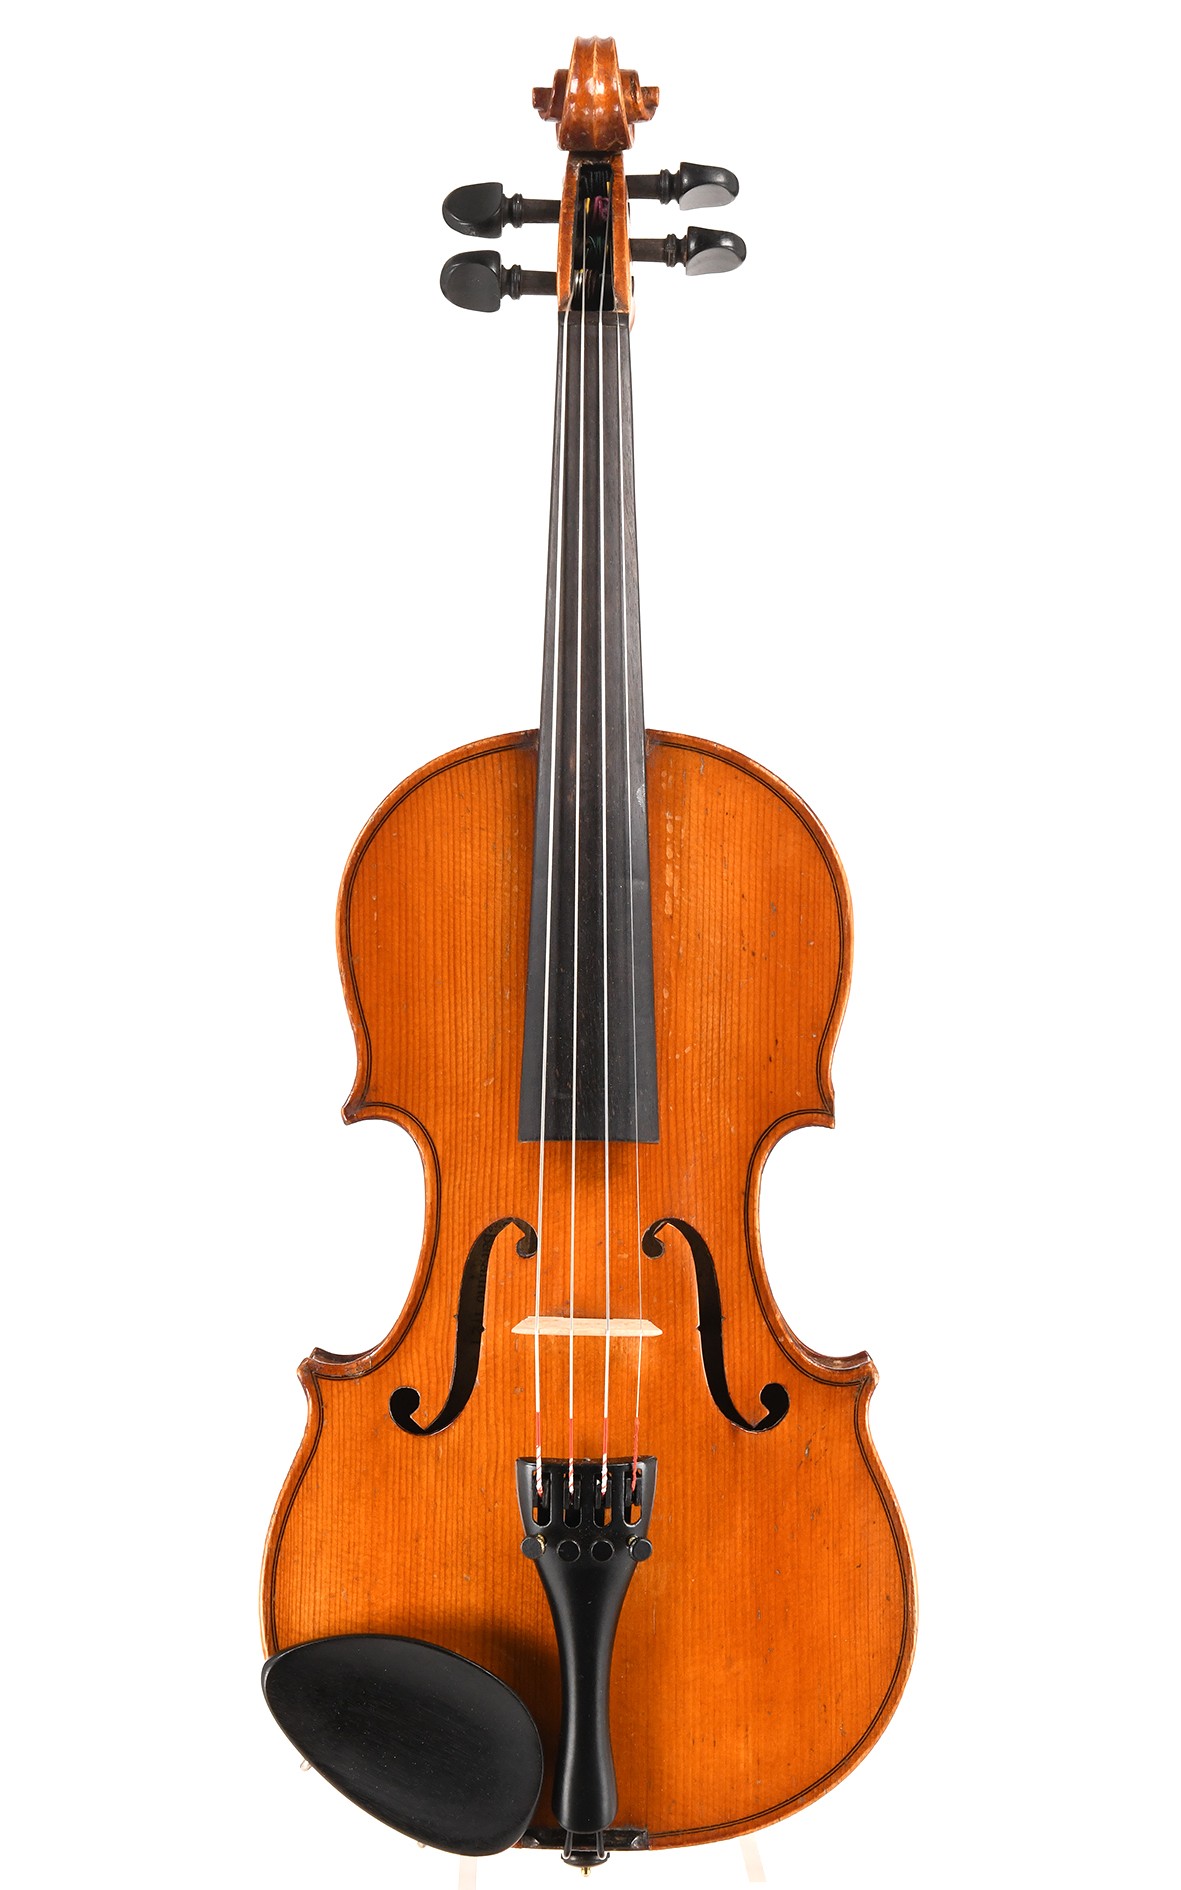 Antique French 1/2 violin from Mirecourt, circa 1900